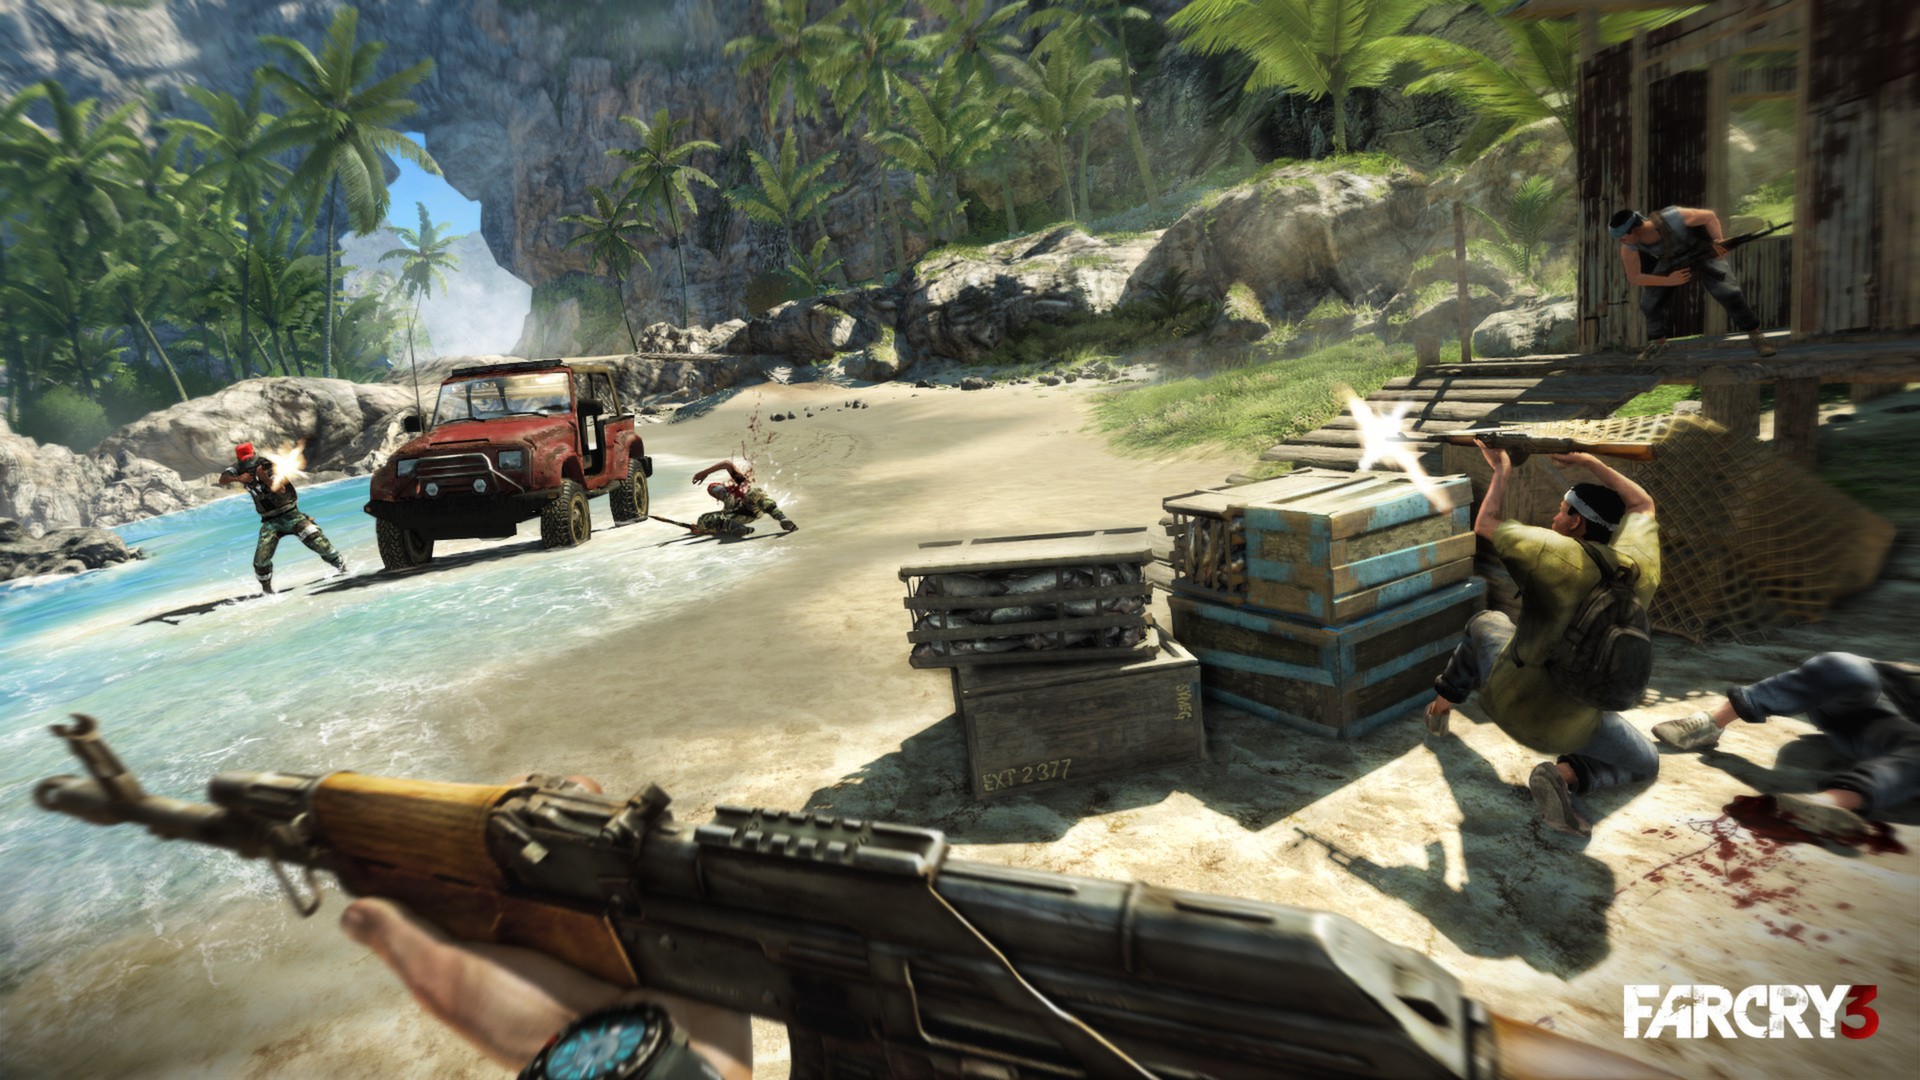 Best game for low-end PCs - Far Cry 3